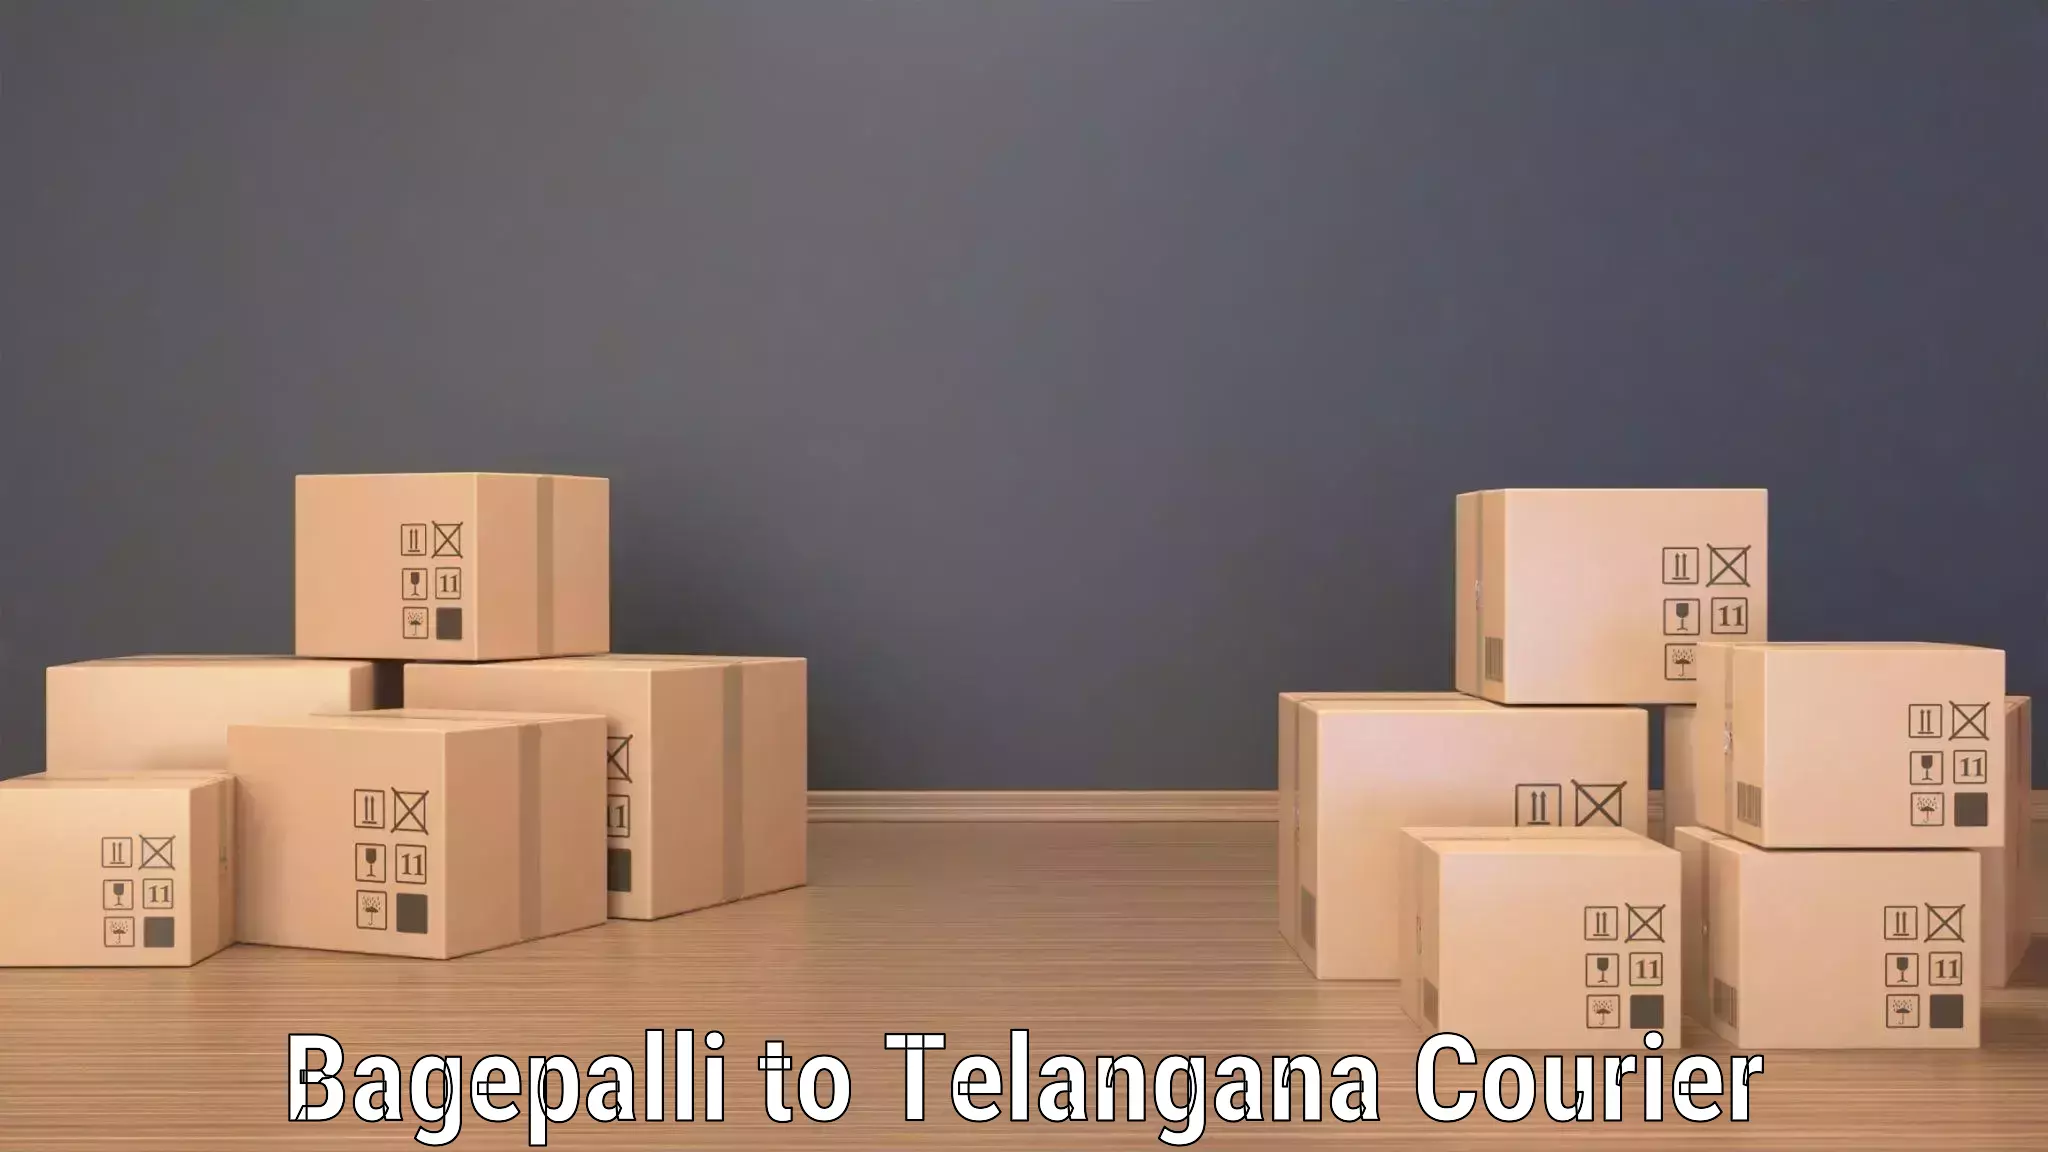 End-to-end delivery in Bagepalli to Mahabubnagar